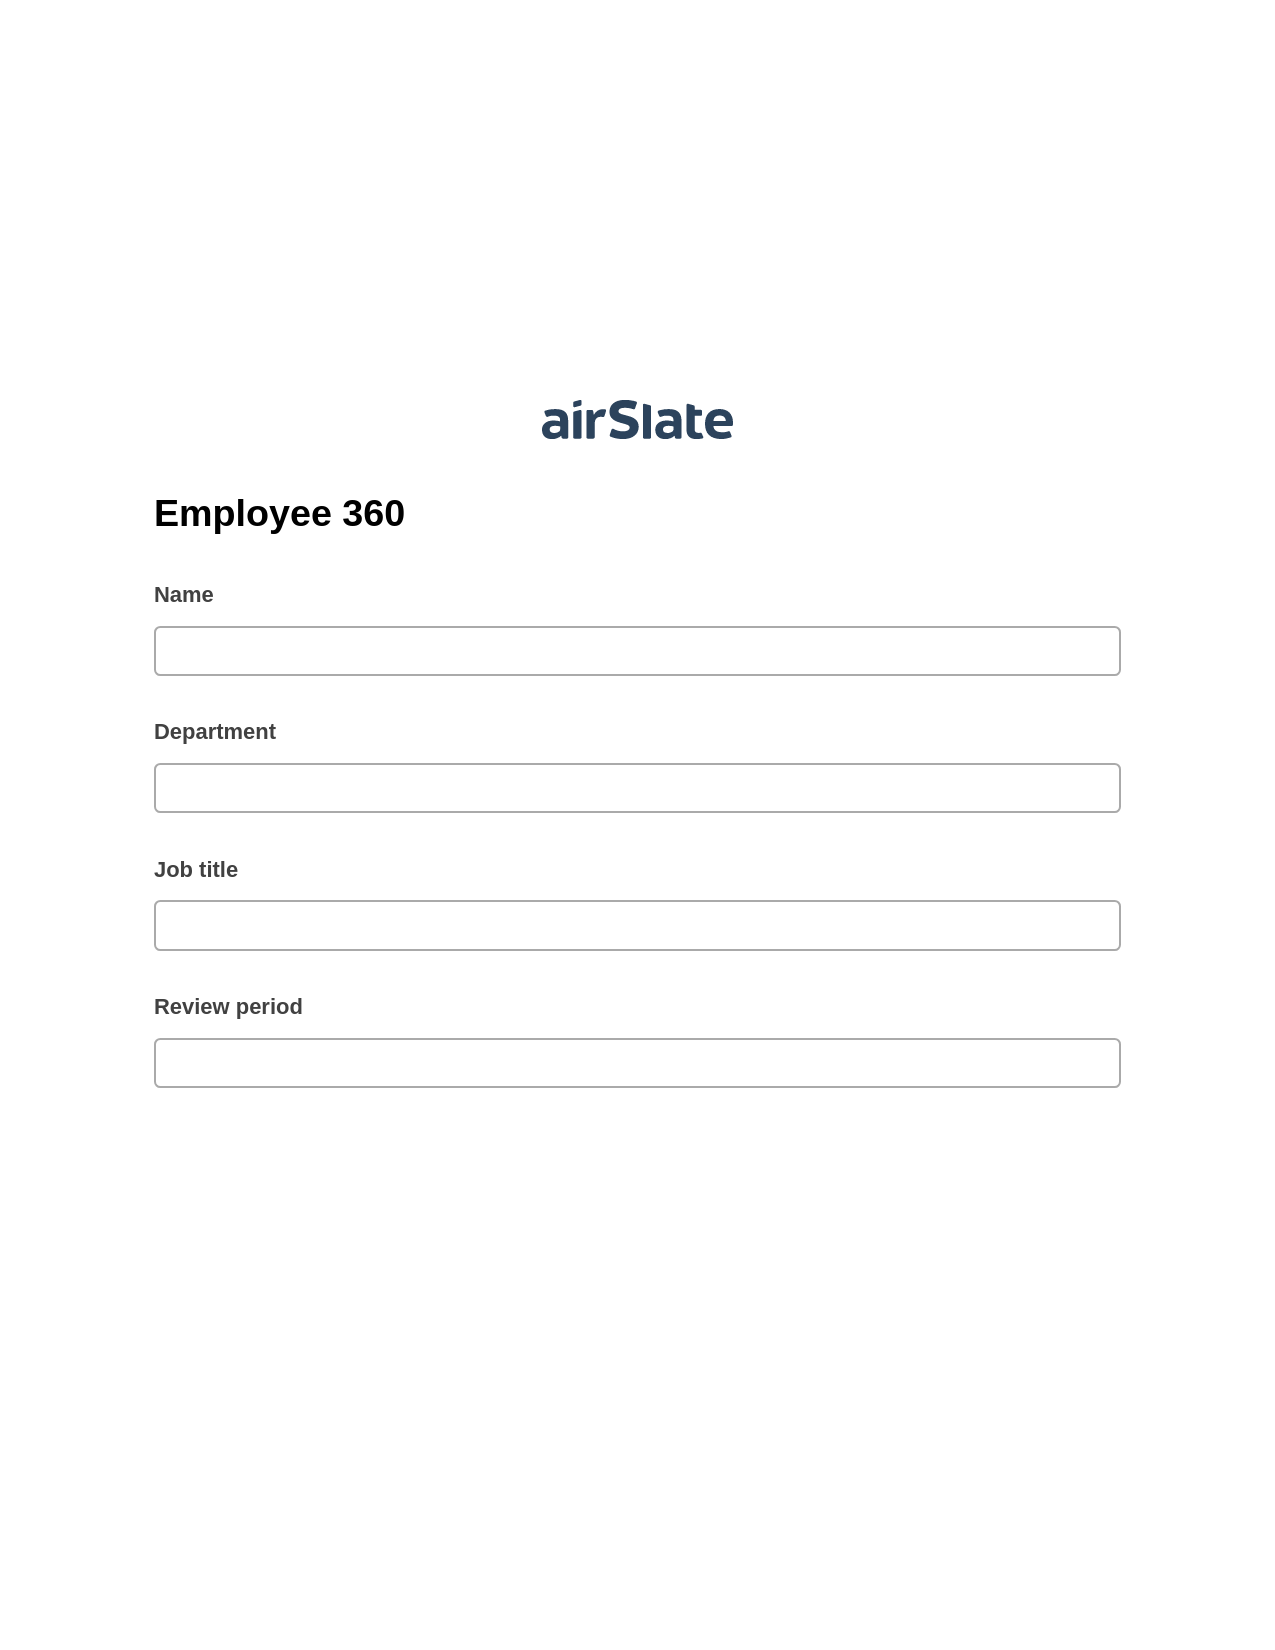 Employee 360 Pre-fill from CSV File Bot, Update MS Dynamics 365 Record Bot, Archive to Box Bot